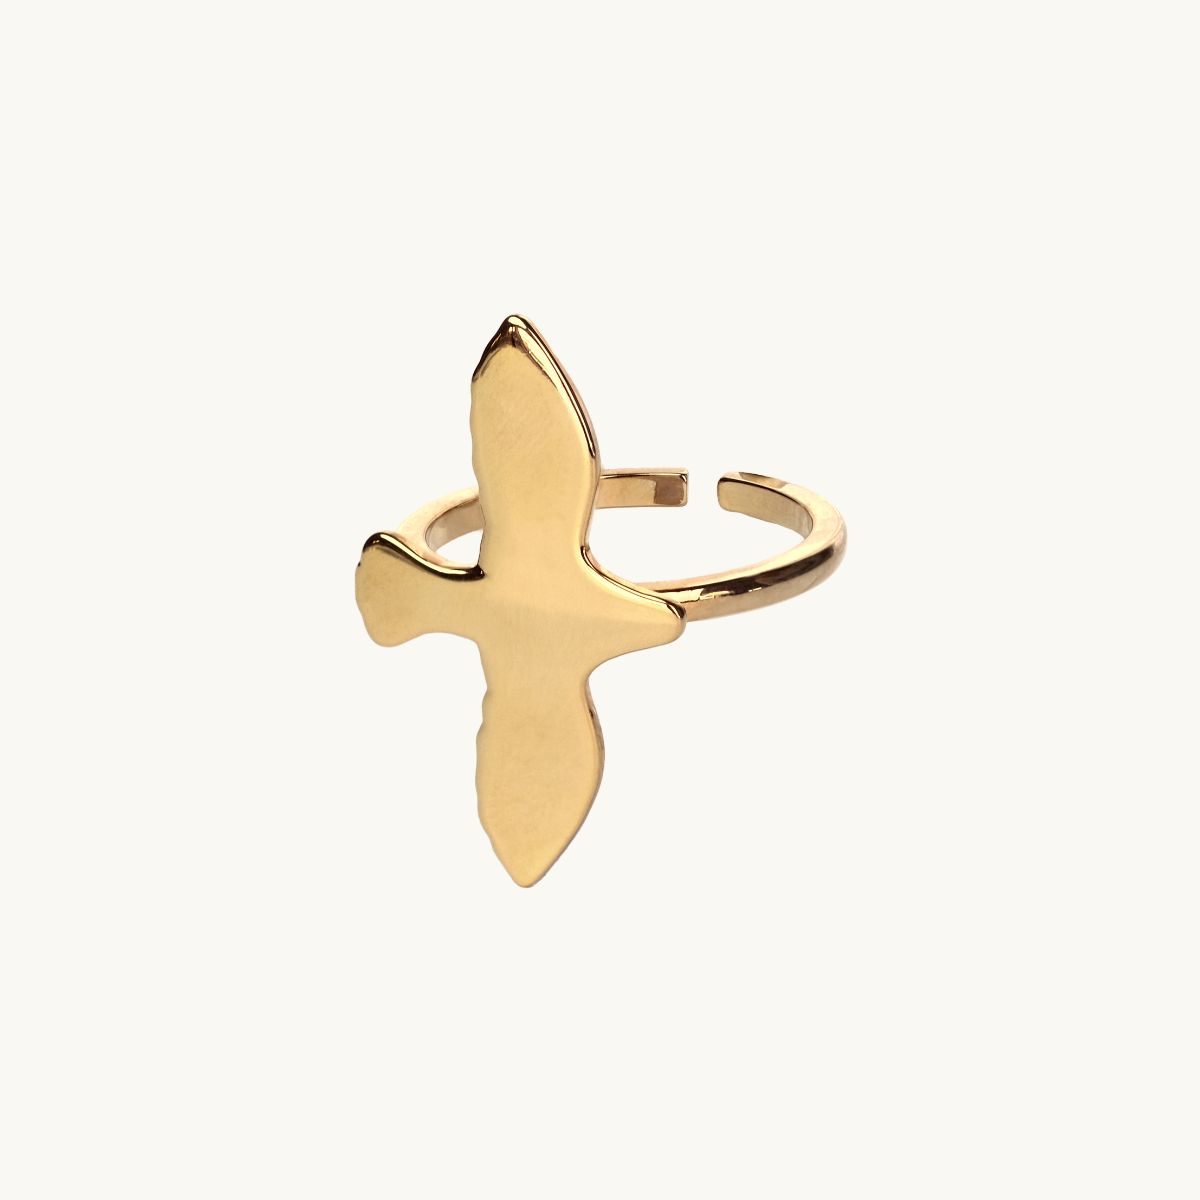 Adjustable ring in gold in shape of a dove